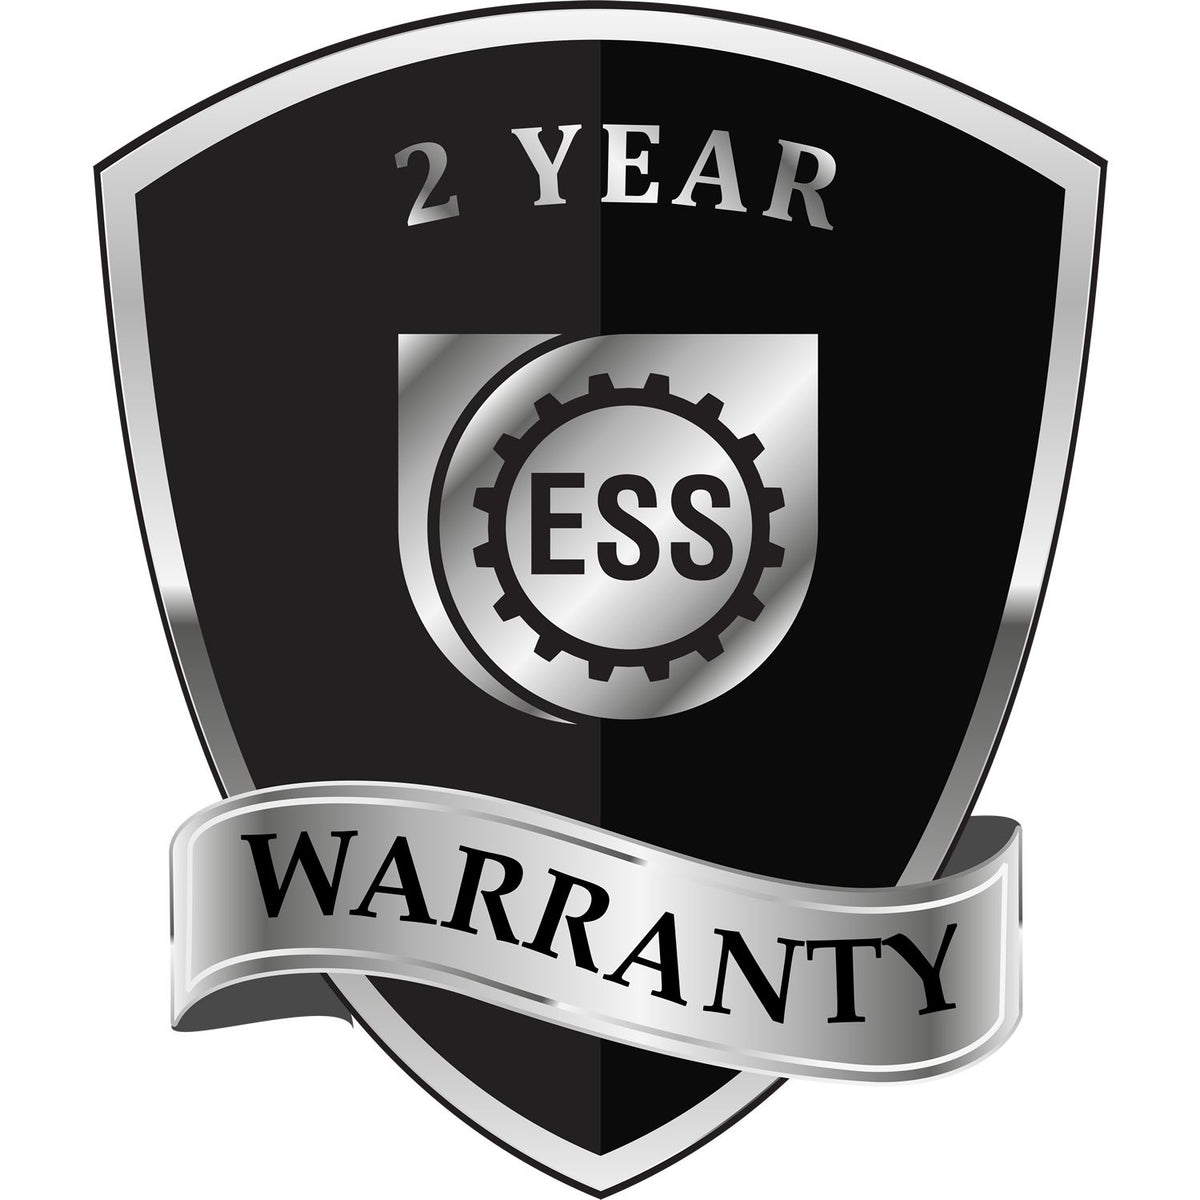 A badge or emblem showing a warranty icon for the State of New Jersey Long Reach Architectural Embossing Seal